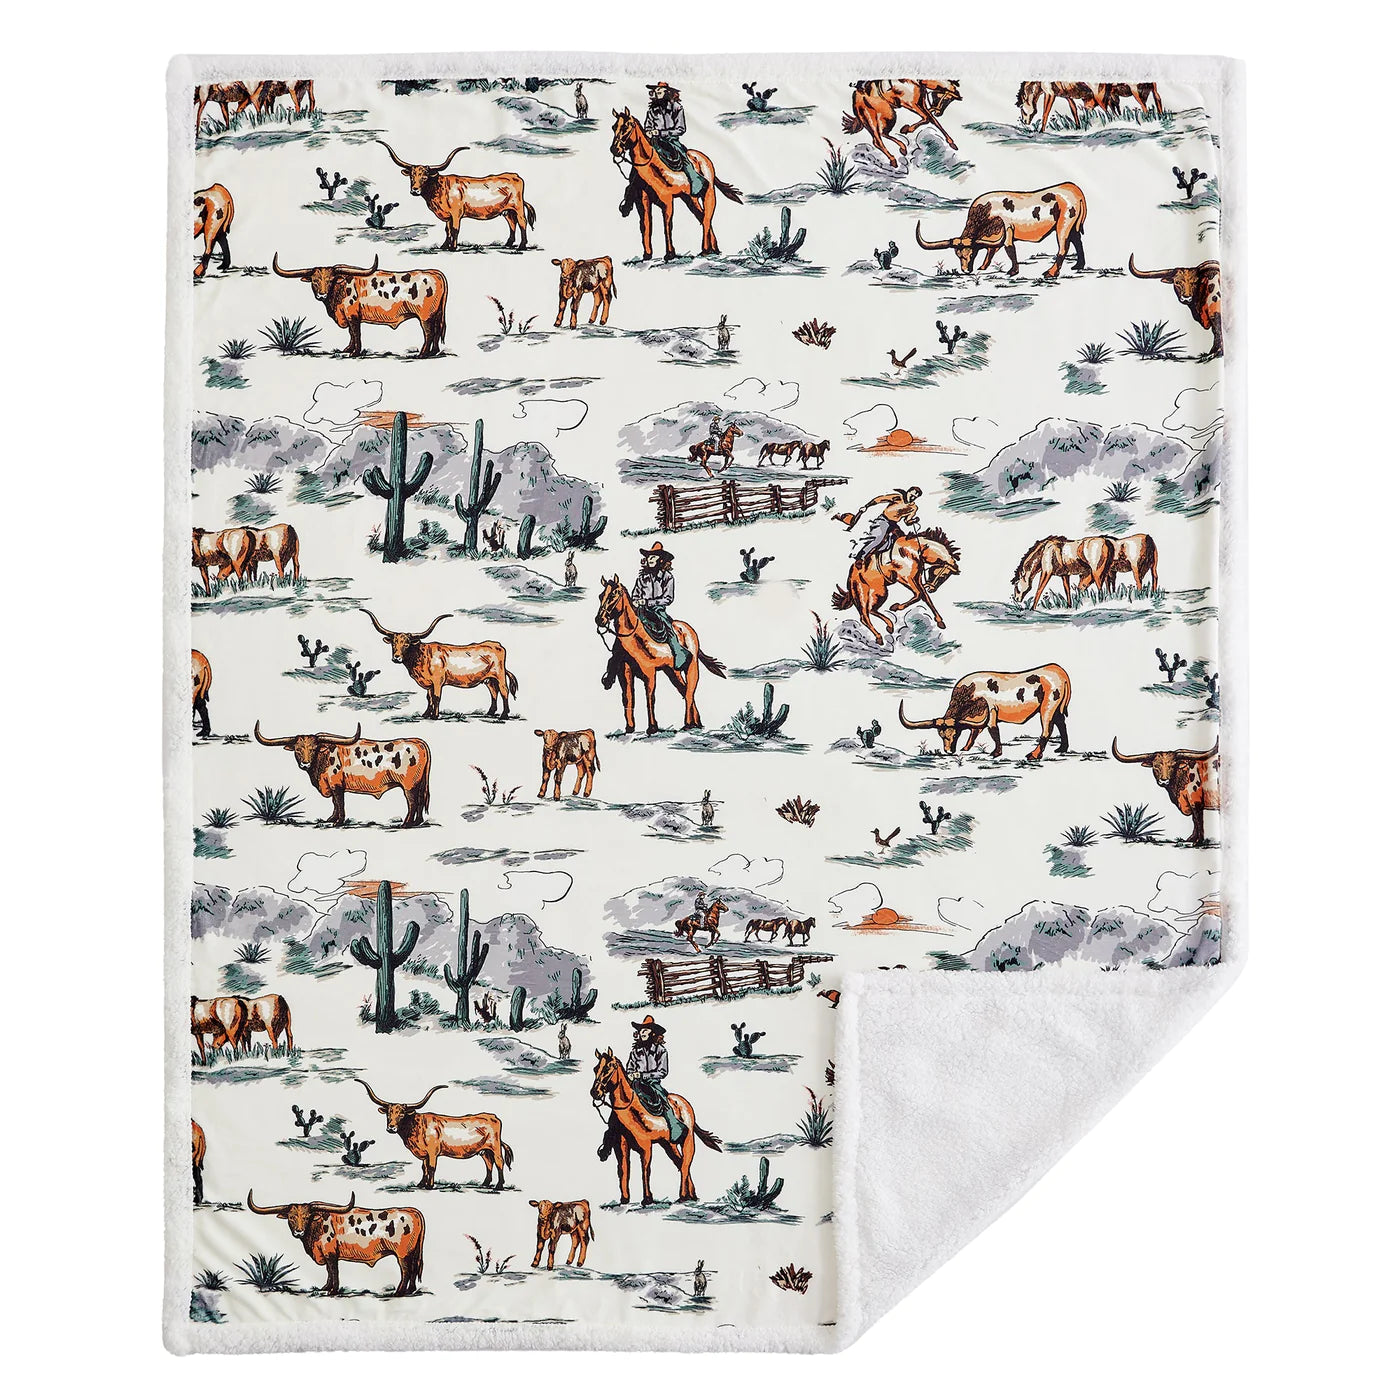 Stay warm with the Western Toile Campfire Throw. Its stylish Western-inspired design features scenes from the west, a plush sherpa reverse, and easy-care lightweight fabric ideal for any occasion. Wrap yourself in cozy comfort that won't break the bank.